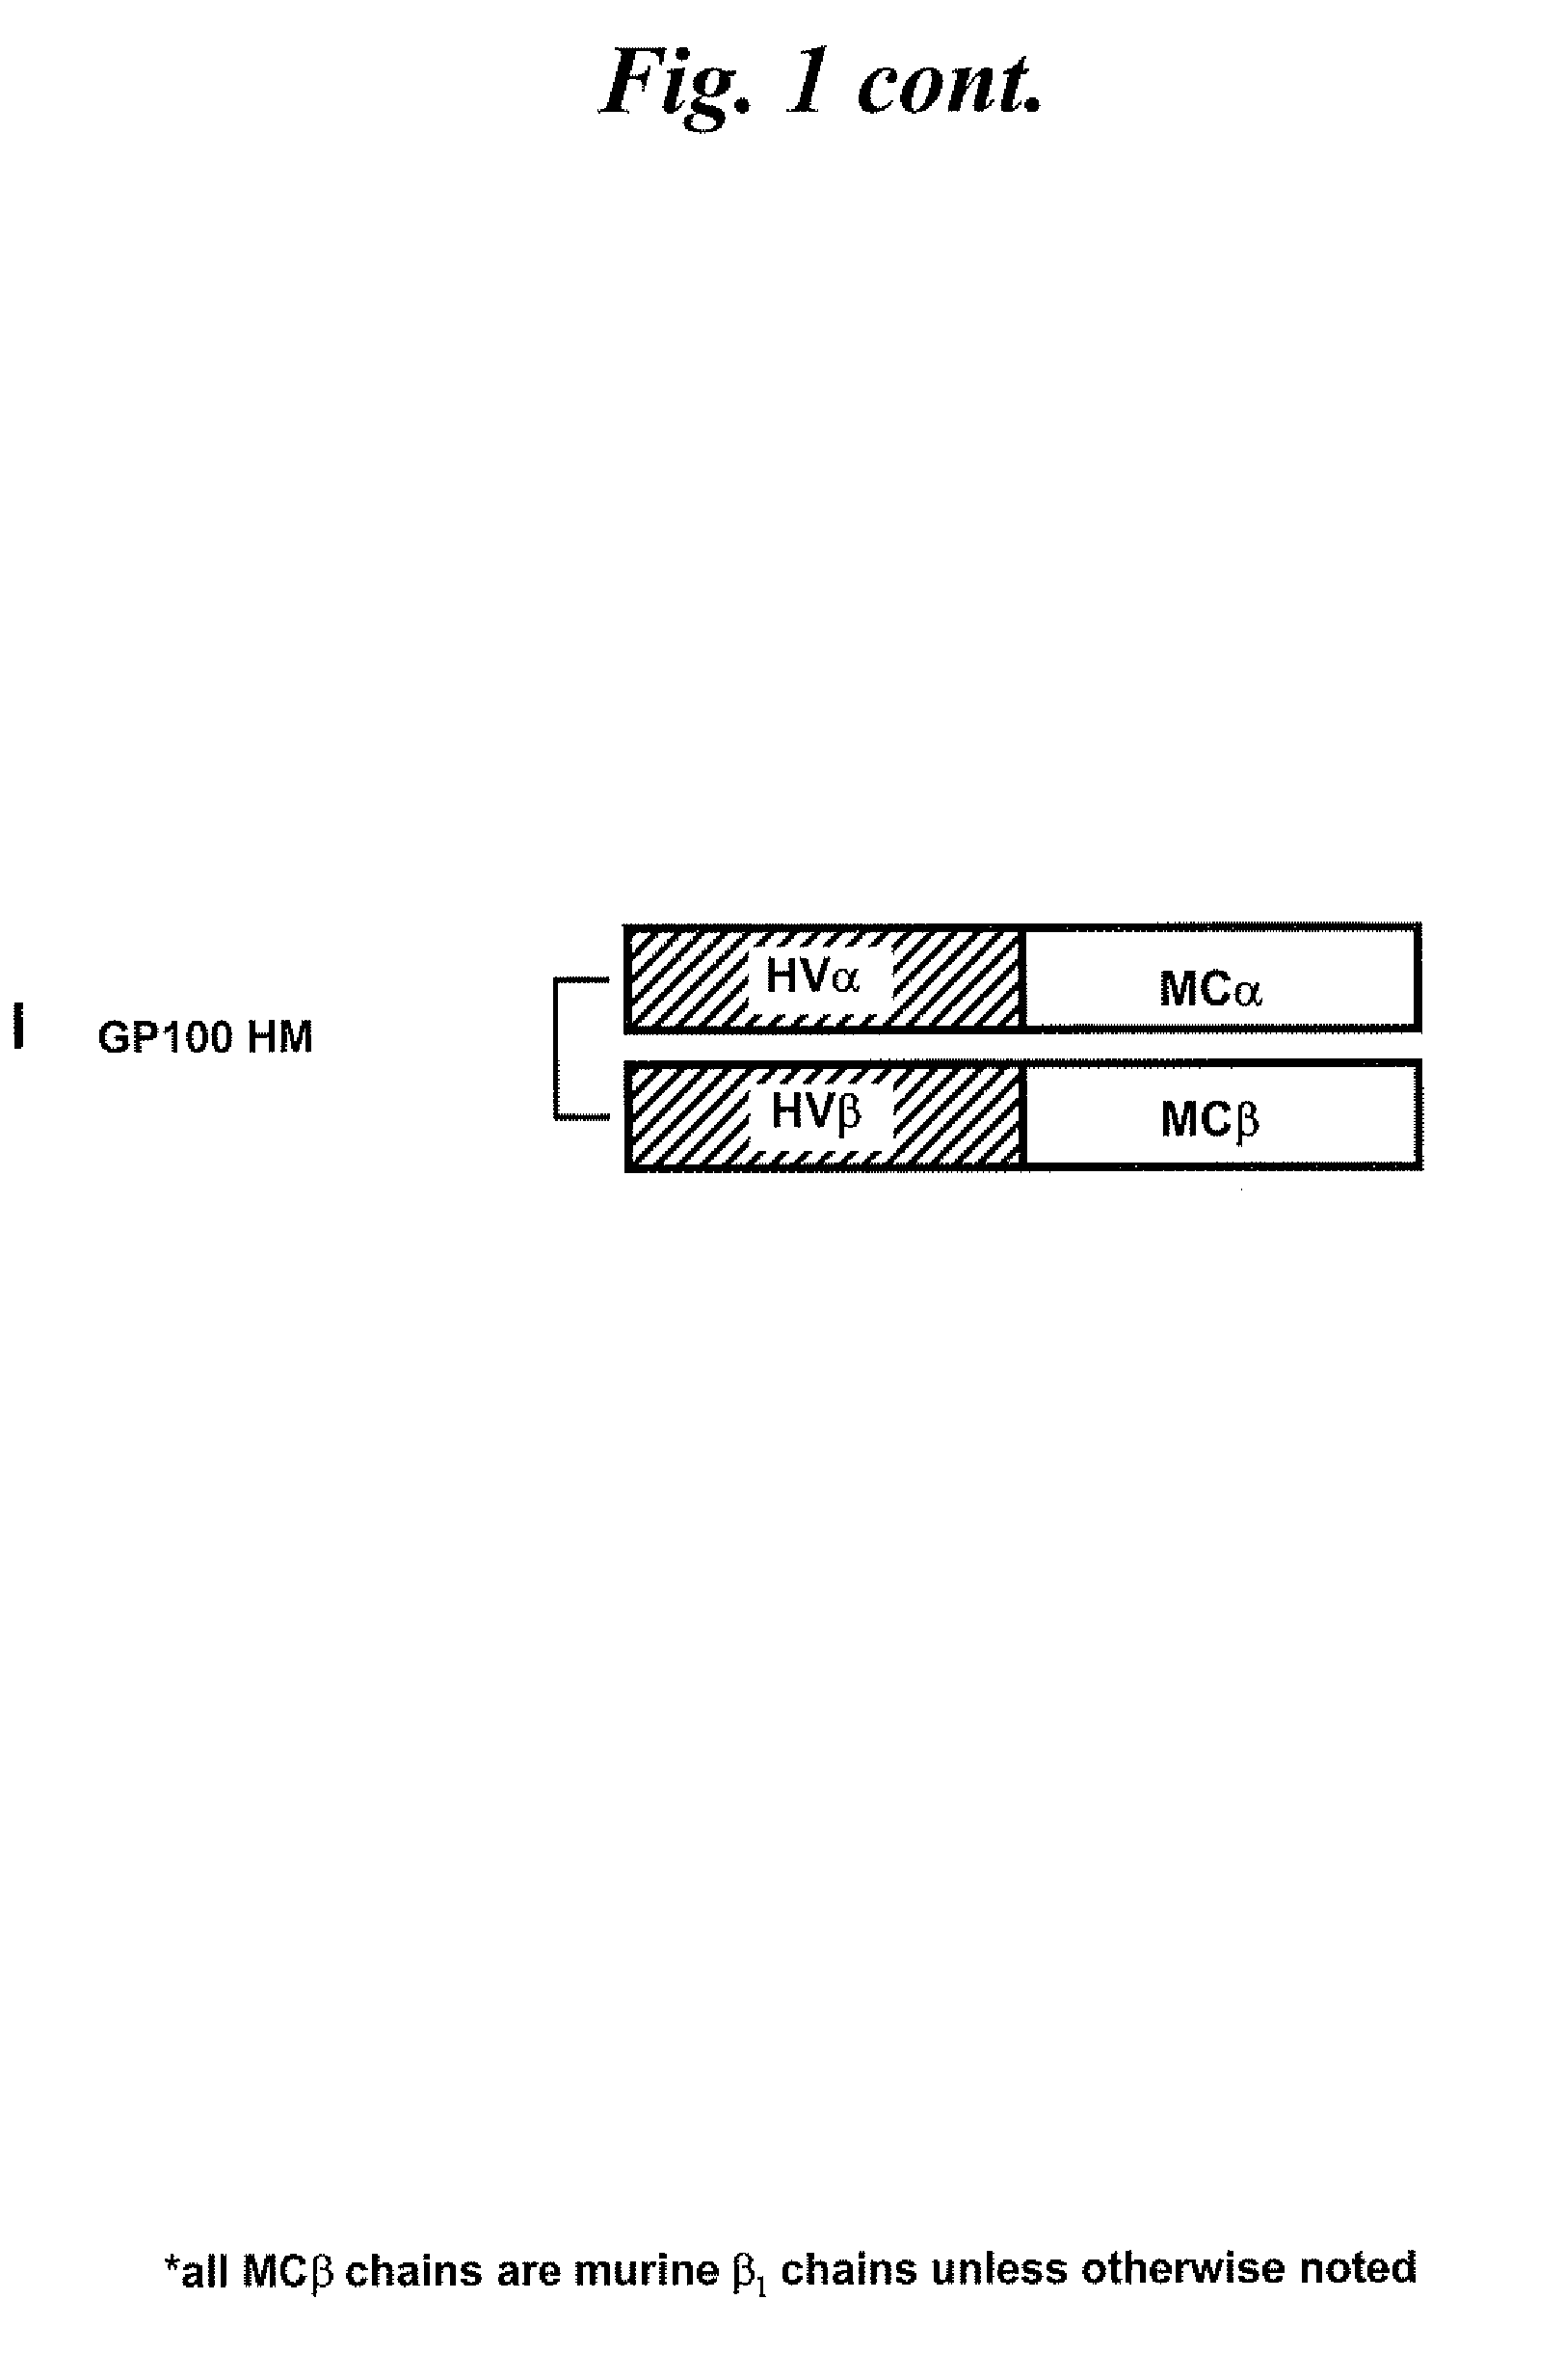 Chimeric t cell receptors and related materials and methods of use